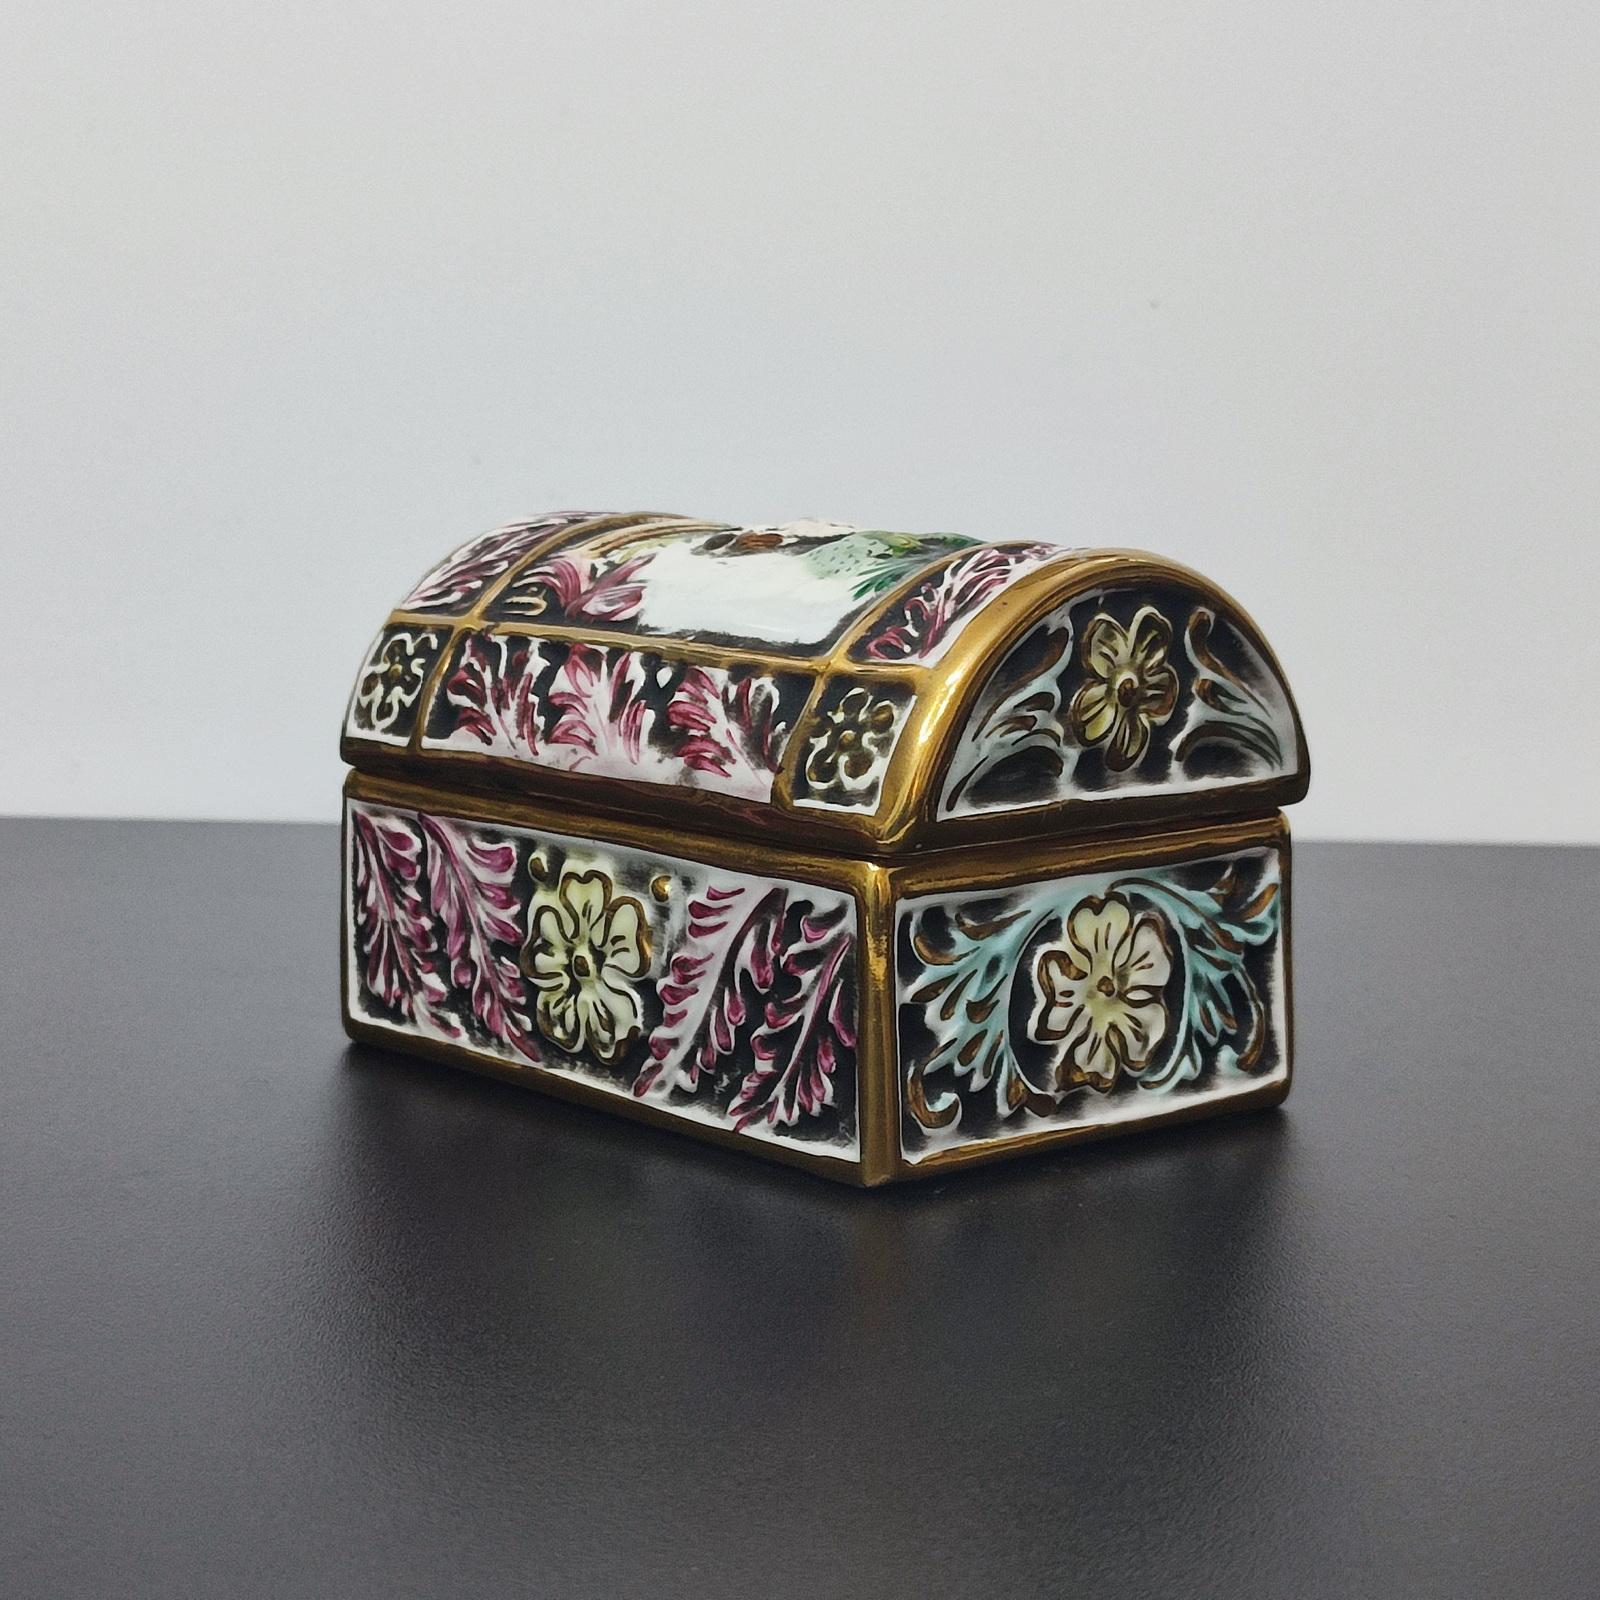 Italian Capodimonte Porcelain Chest, Jewelry Box, Italy Mid 20th Century - FREE SHIPPING For Sale